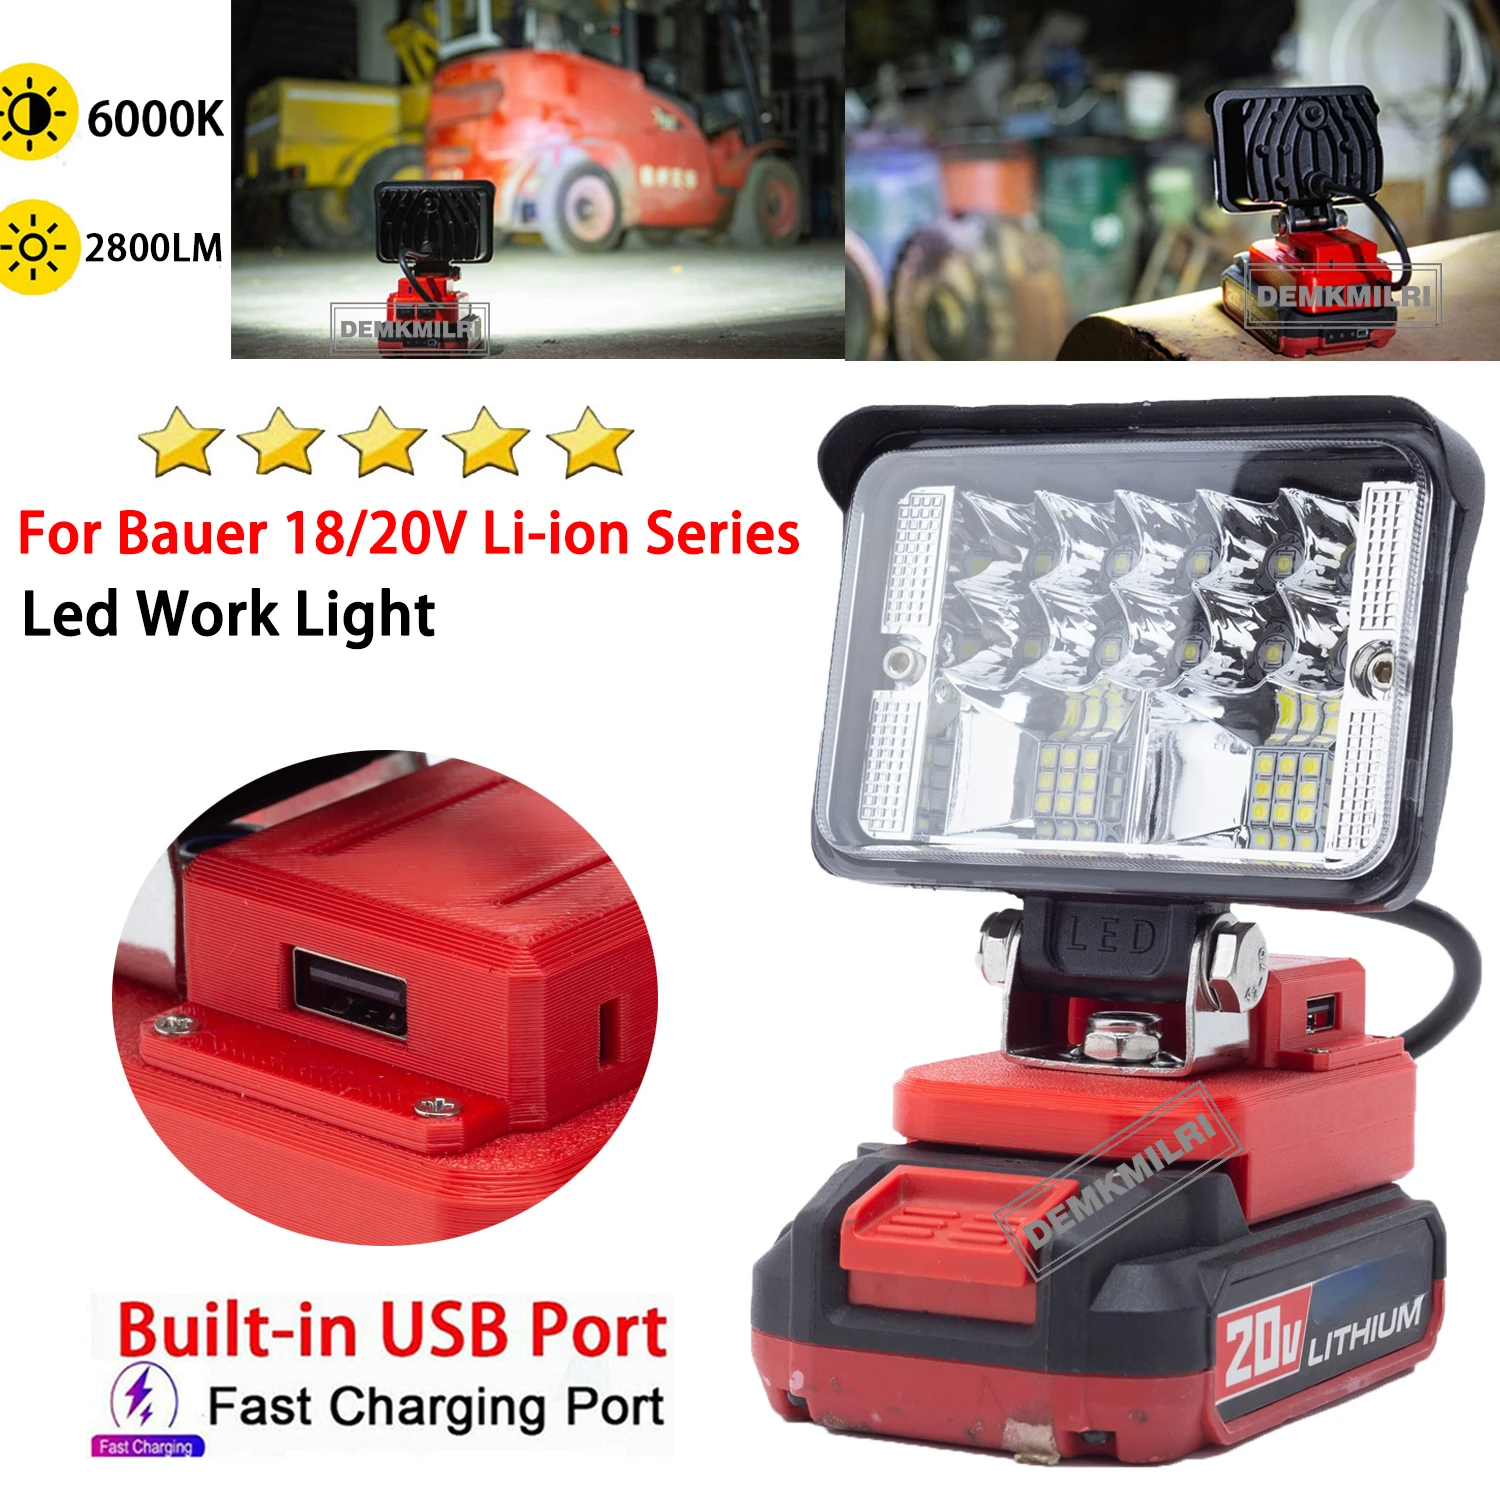 

For Bauer 18V/20V Li-Ion Battery-(2800LM) New Cordless LED Work Light Familiale Camping OutdoorTravel Light Fast CHARGE USB